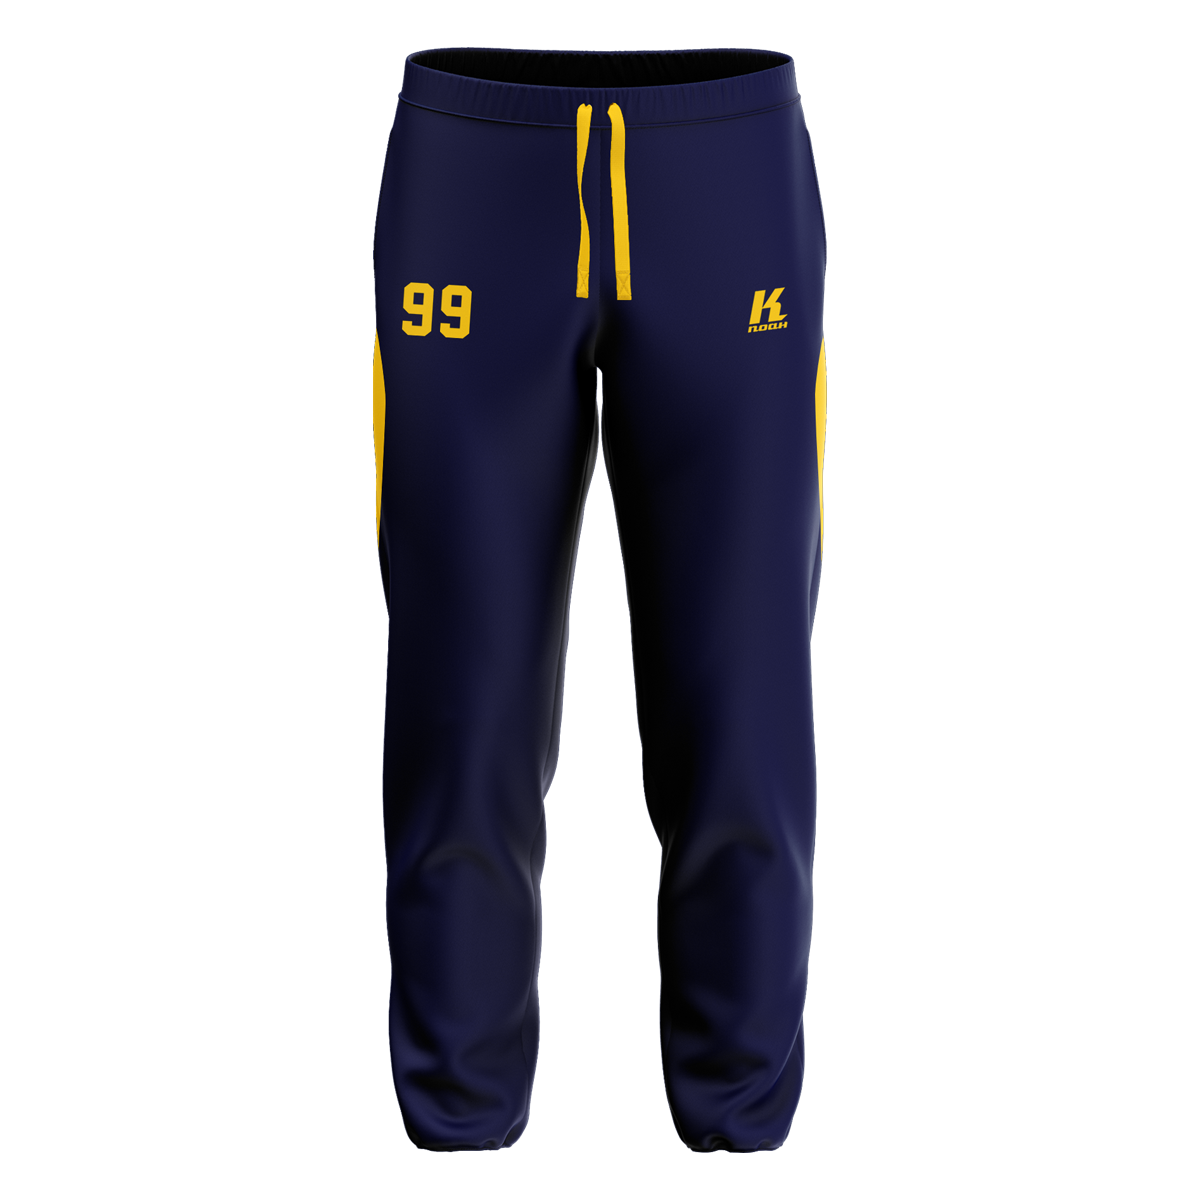 Wolverines Signature Series Sweat Pant with cuffs with Playernumber/Initials